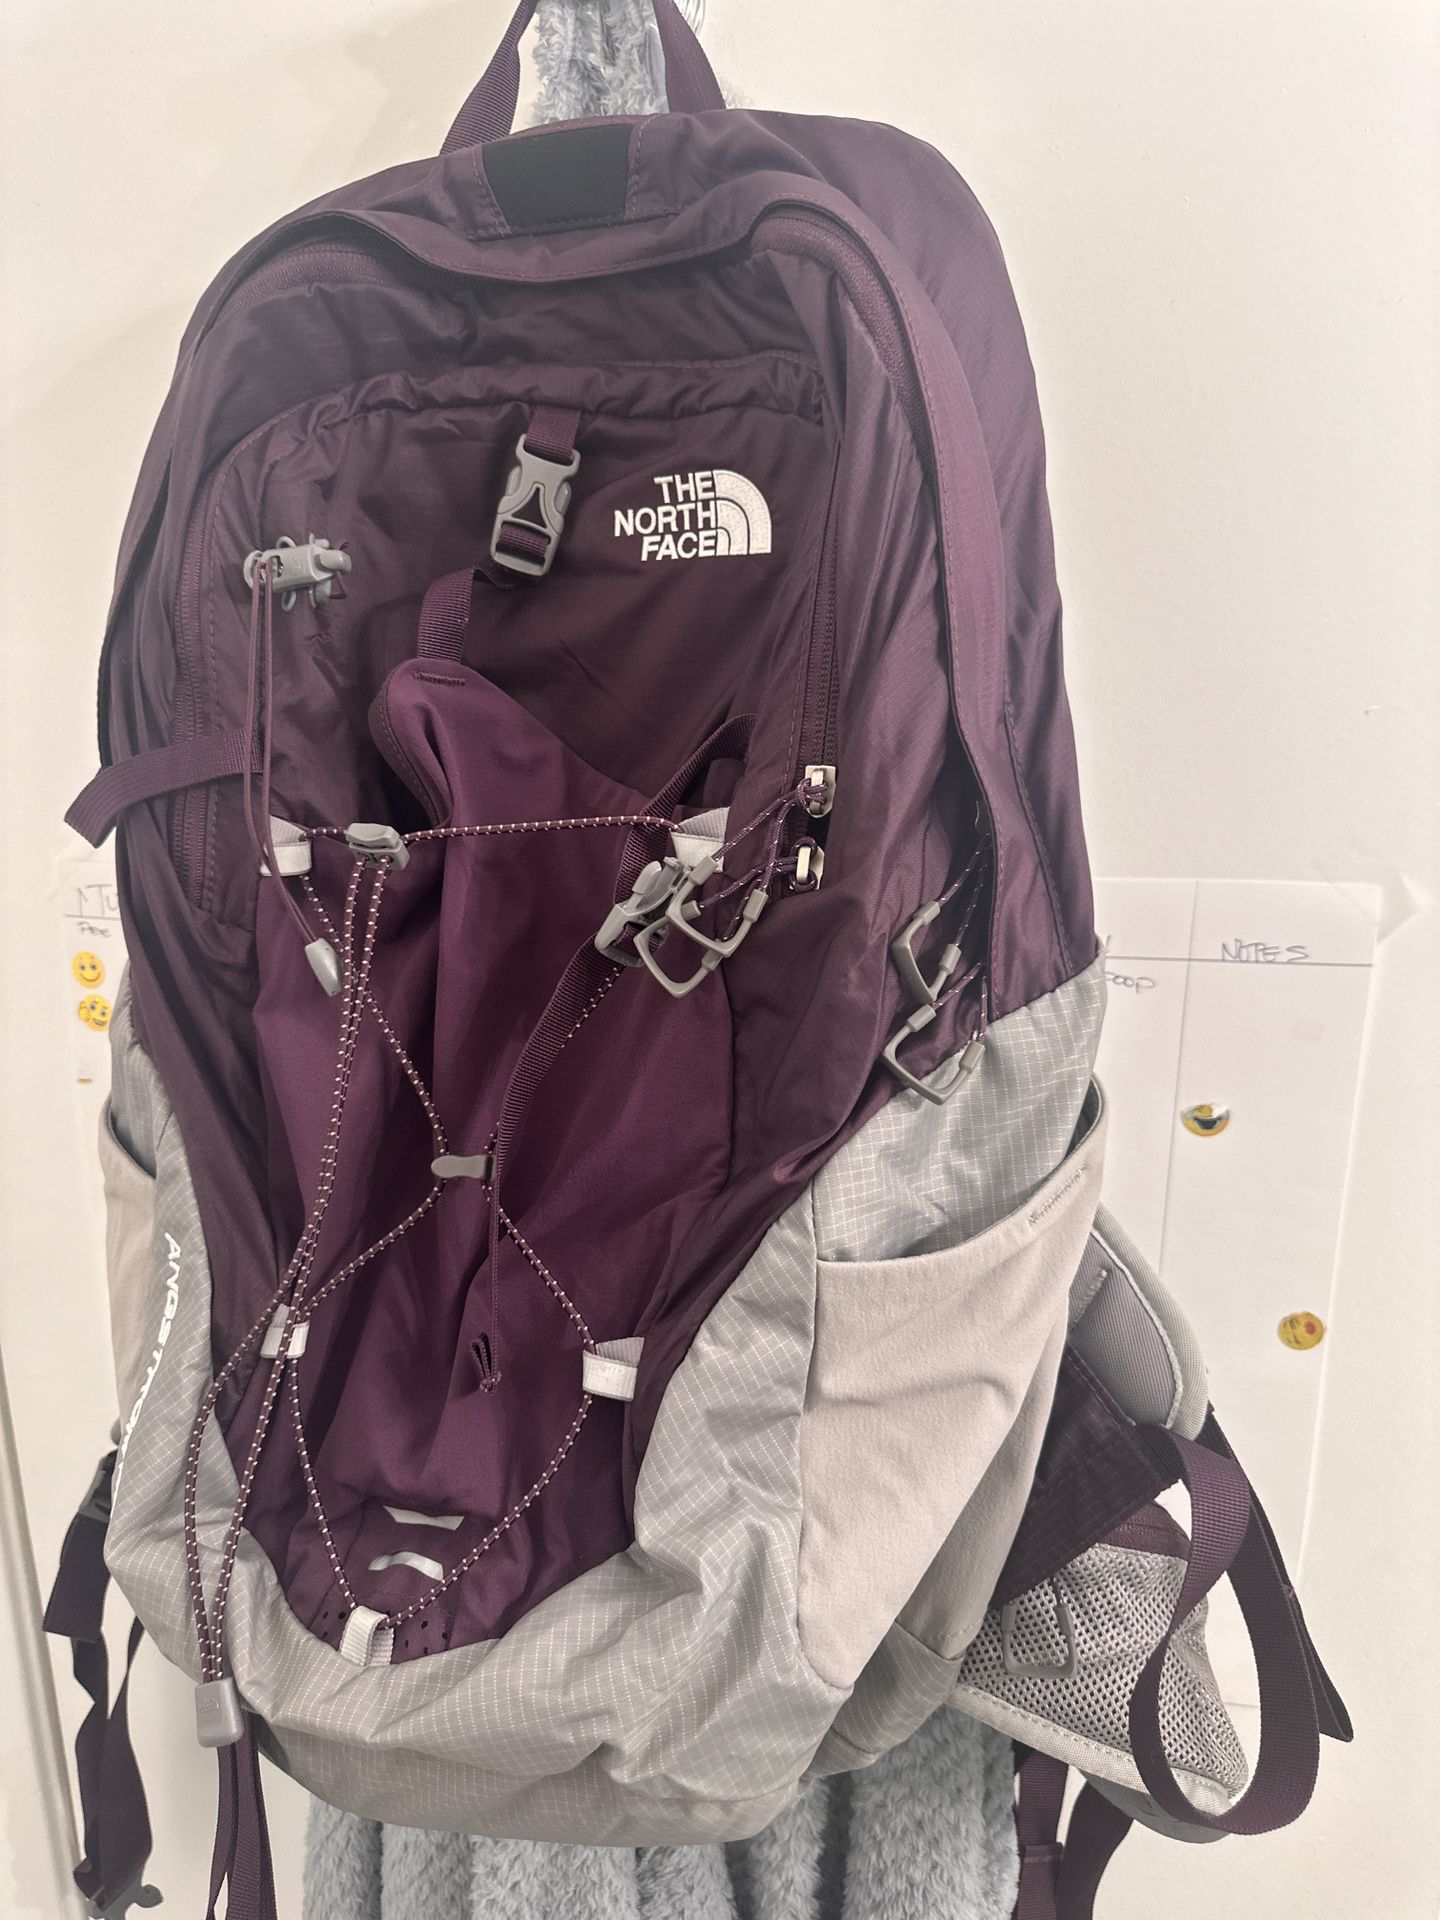 North face Brand New Hiking Backpack (angstrom 28)